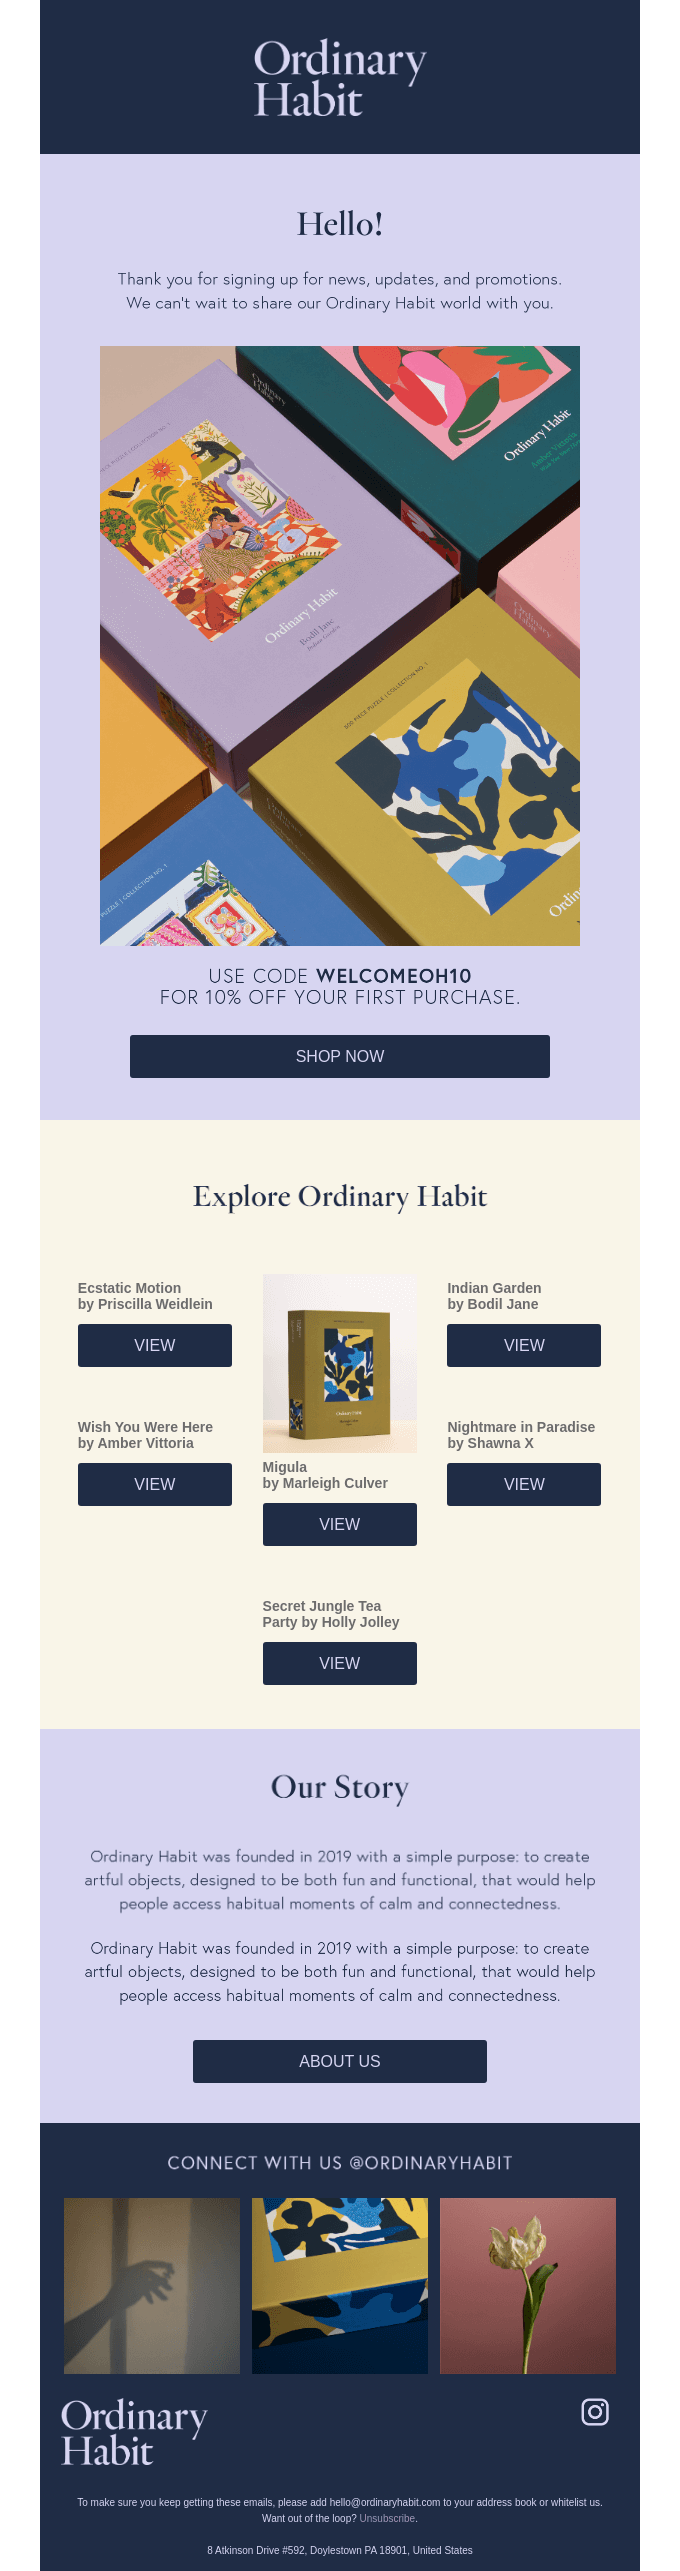 Welcome to Ordinary Habit